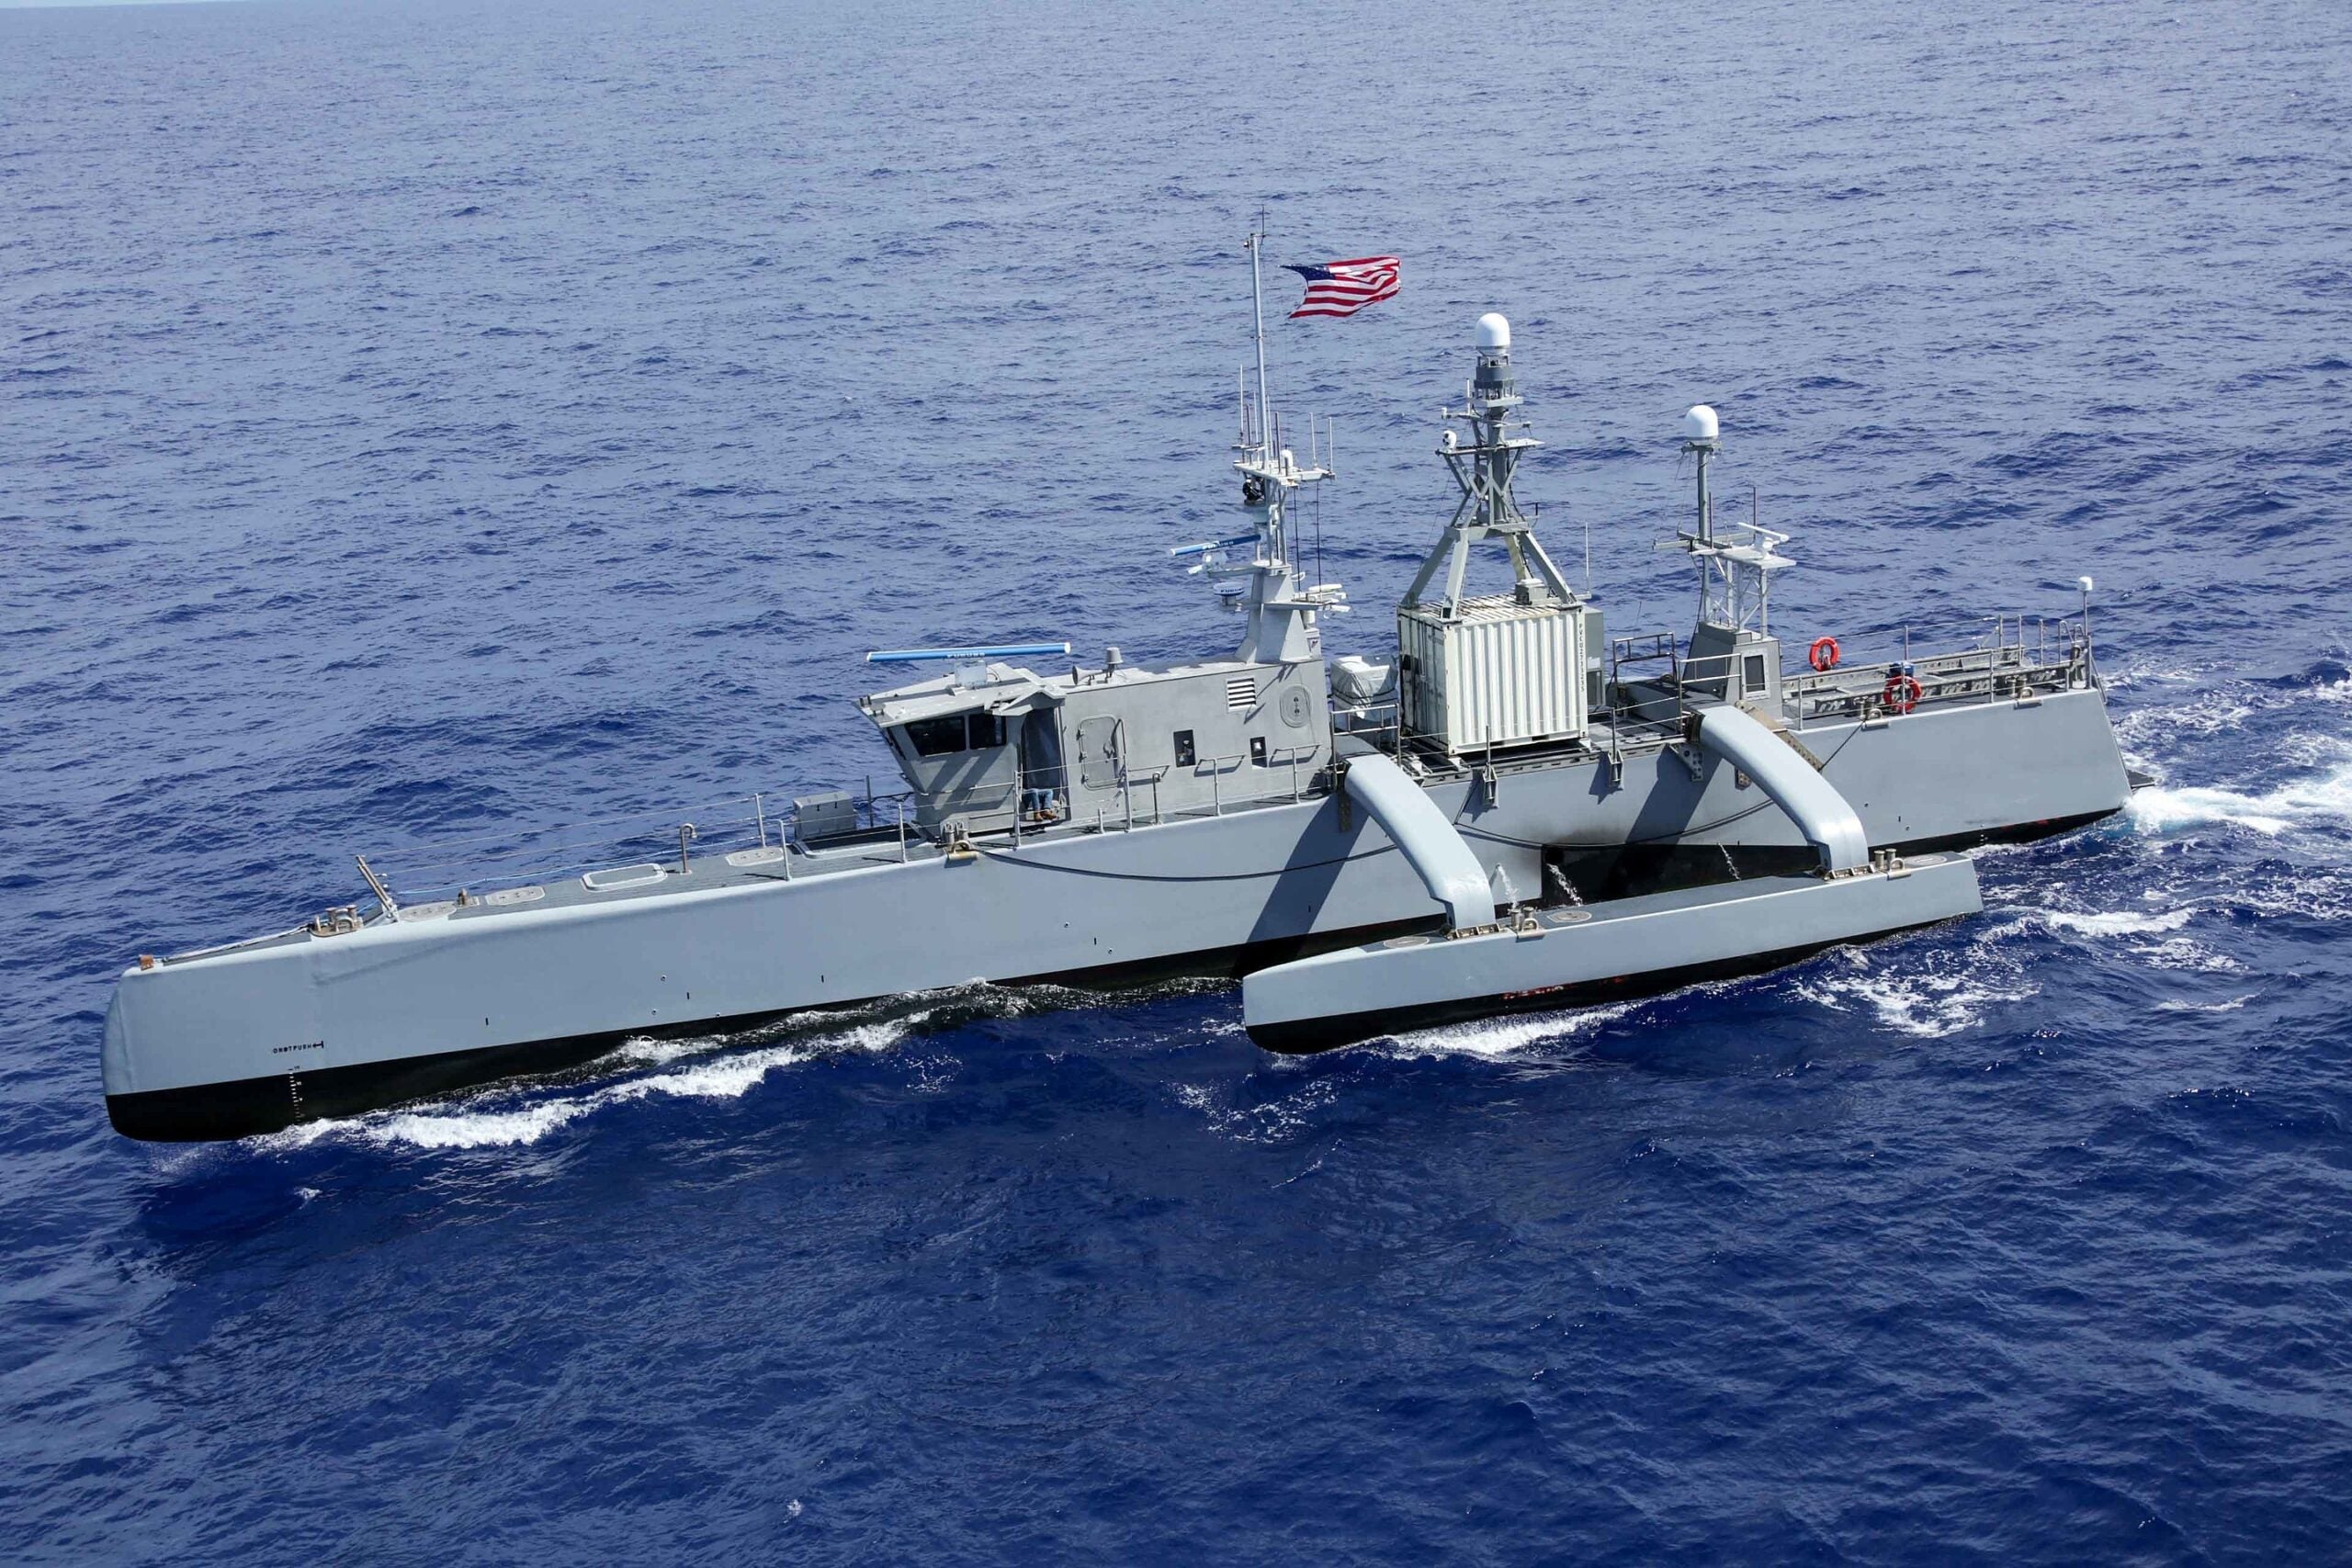 220728-N-DF558-1750 PACIFIC OCEAN (July 28, 2022) Medium displacement unmanned surface vessel Sea Hunter sails in formation during Rim of the Pacific (RIMPAC) 2022, July 28. Twenty-six nations, 38 ships, three submarines, more than 30 unmanned systems, approximately 170 aircraft and 25,000 personnel are participating in RIMPAC from June 29 to Aug. 4 in and around the Hawaiian Islands and Southern California. The world’s largest international maritime exercise, RIMPAC provides a unique training opportunity while fostering and sustaining cooperative relationships among participants critical to ensuring the safety of sea lanes and security on the world’s oceans. RIMPAC 2022 is the 28th exercise in the series that began in 1971. (U.S. Navy photo by Mass Communication Specialist 3rd Class Aleksandr Freutel)